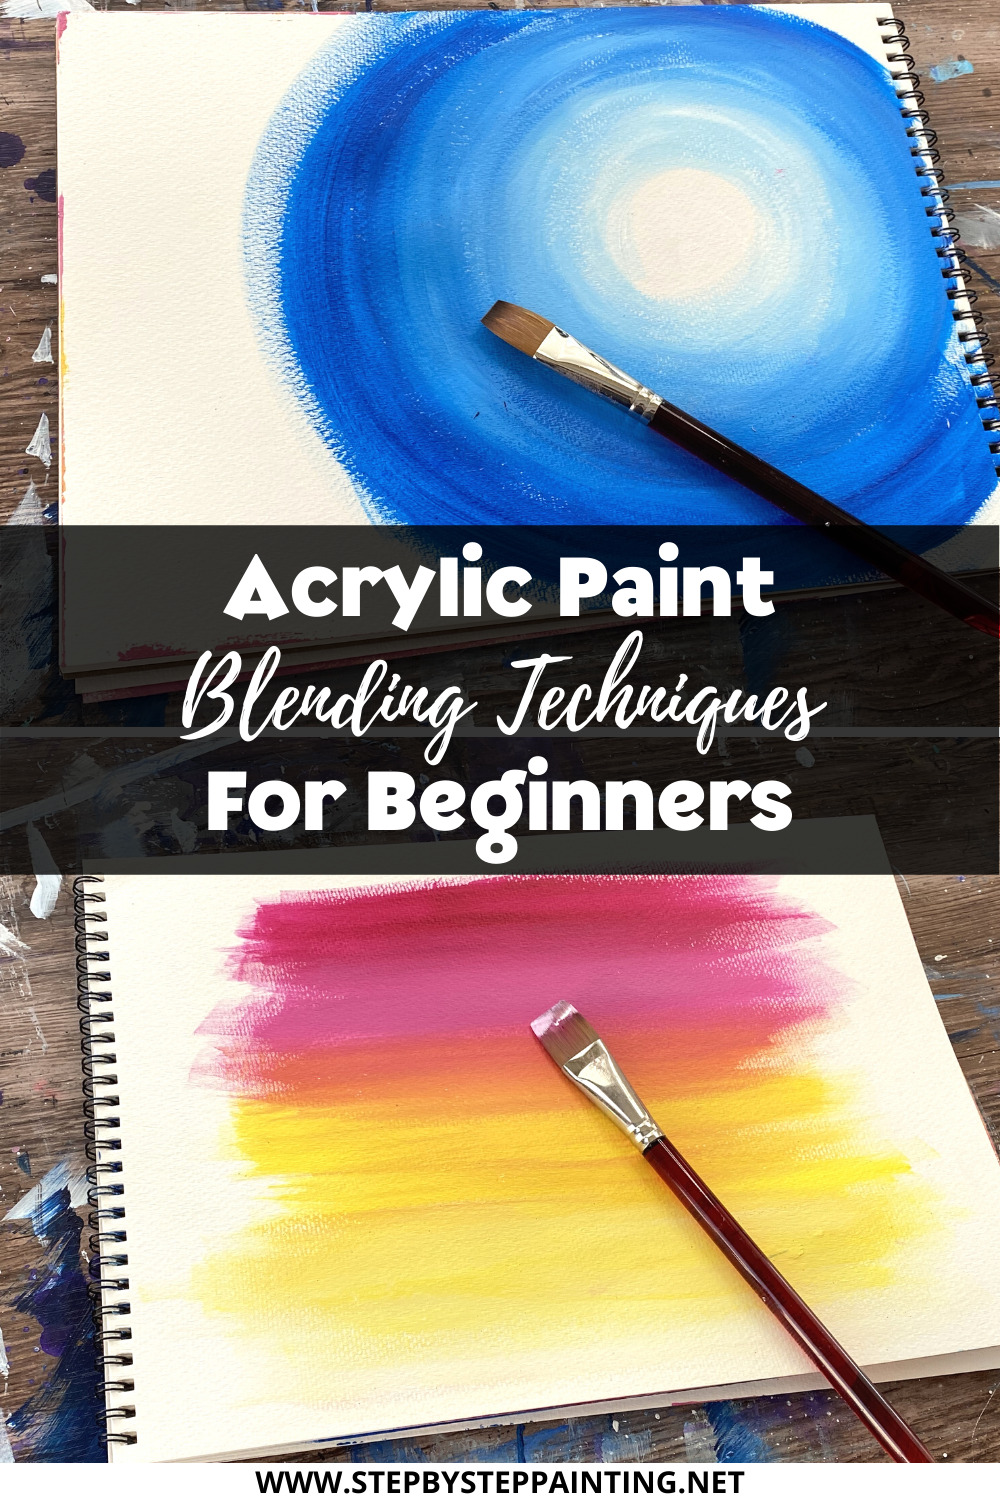 How to blend acrylics 2